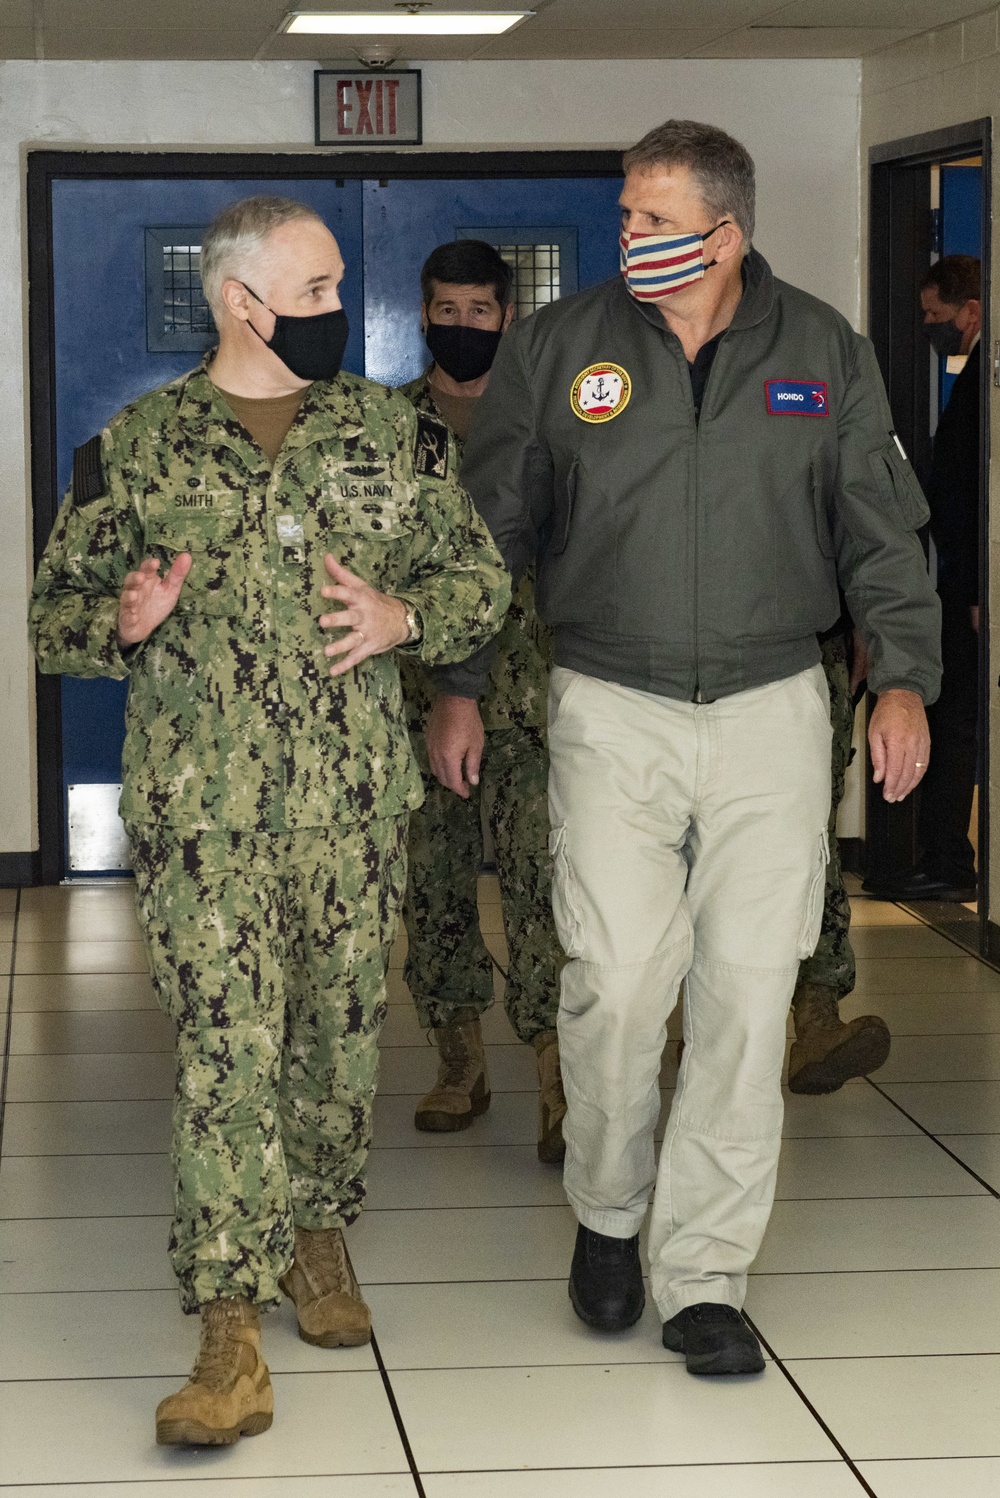 Assistant Secretary of the Navy (RD&amp;A) Visits Units in Pacific Northwest